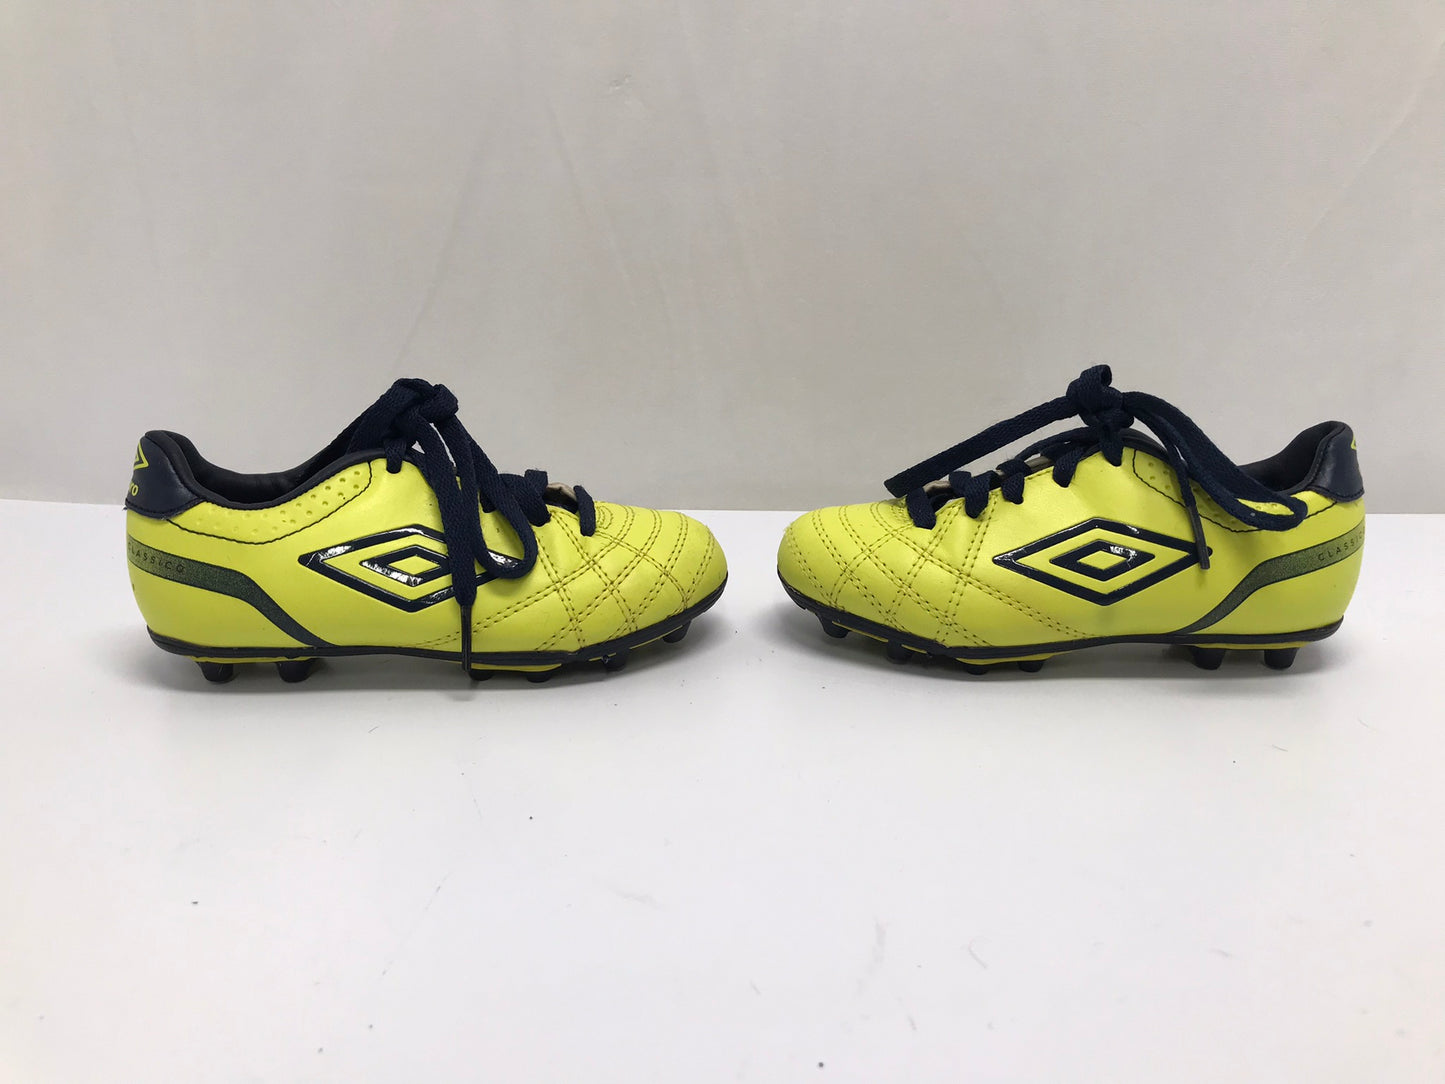 Soccer Shoes Cleats Child Size 11 Umbro Lime and Marine Blue Excellent